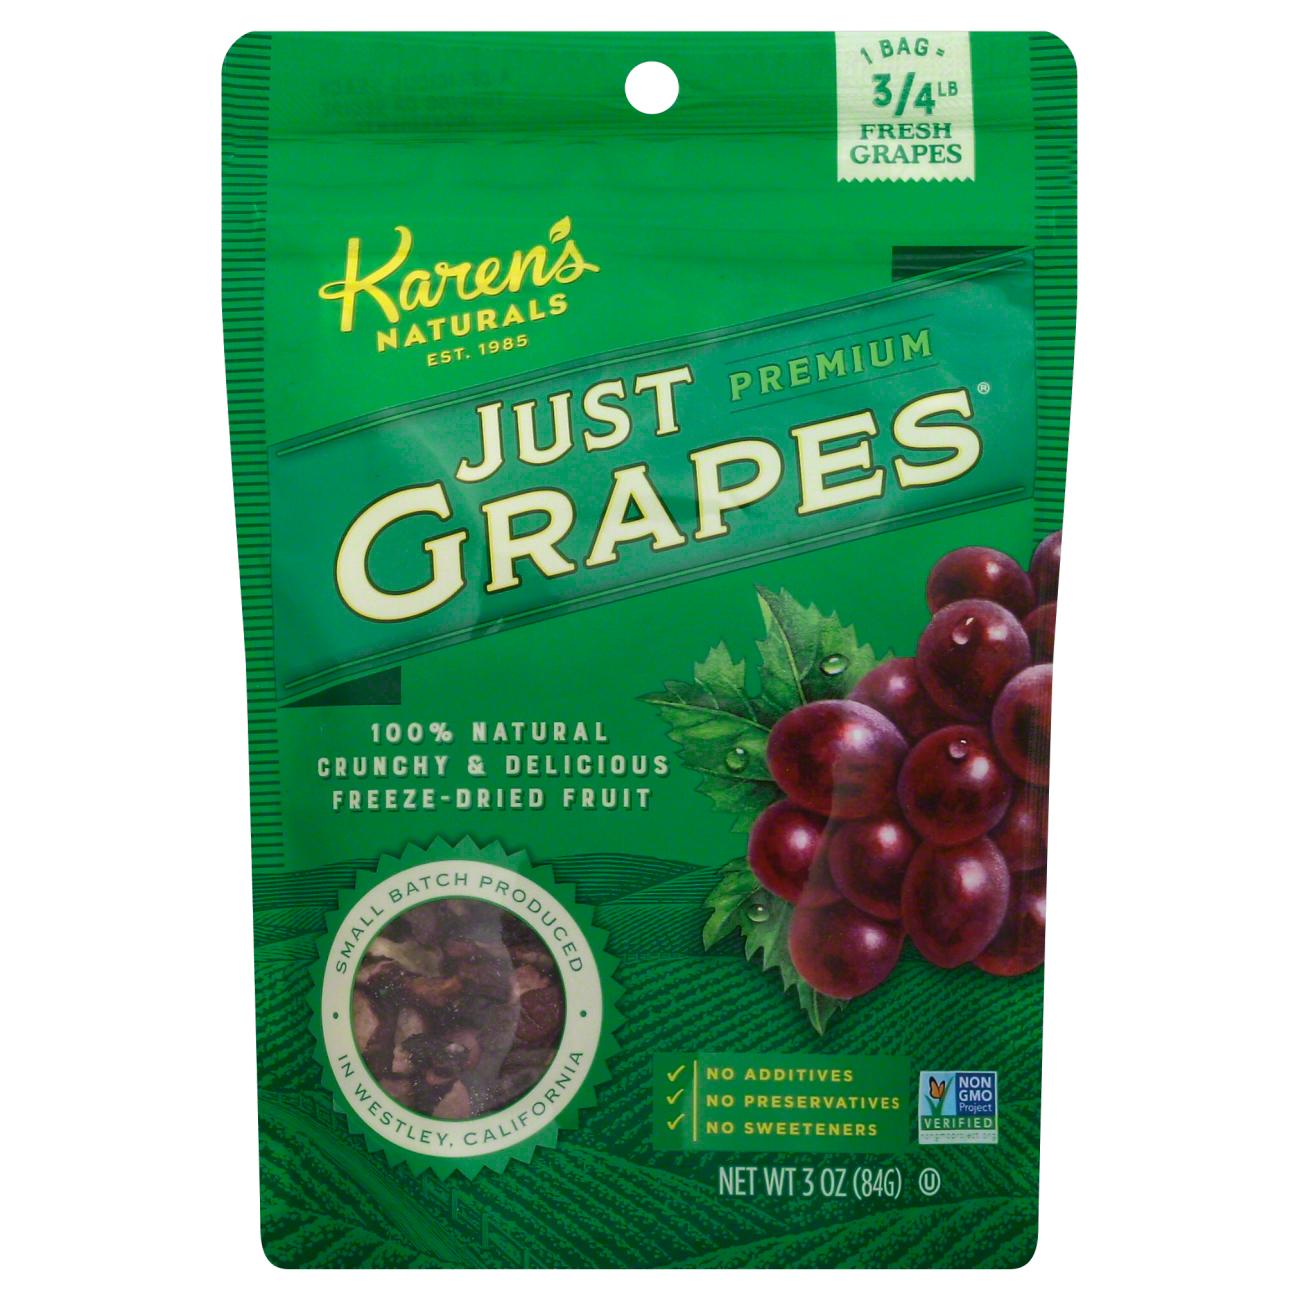 Just Tomatoes, Etc.! Just Grapes; image 1 of 2